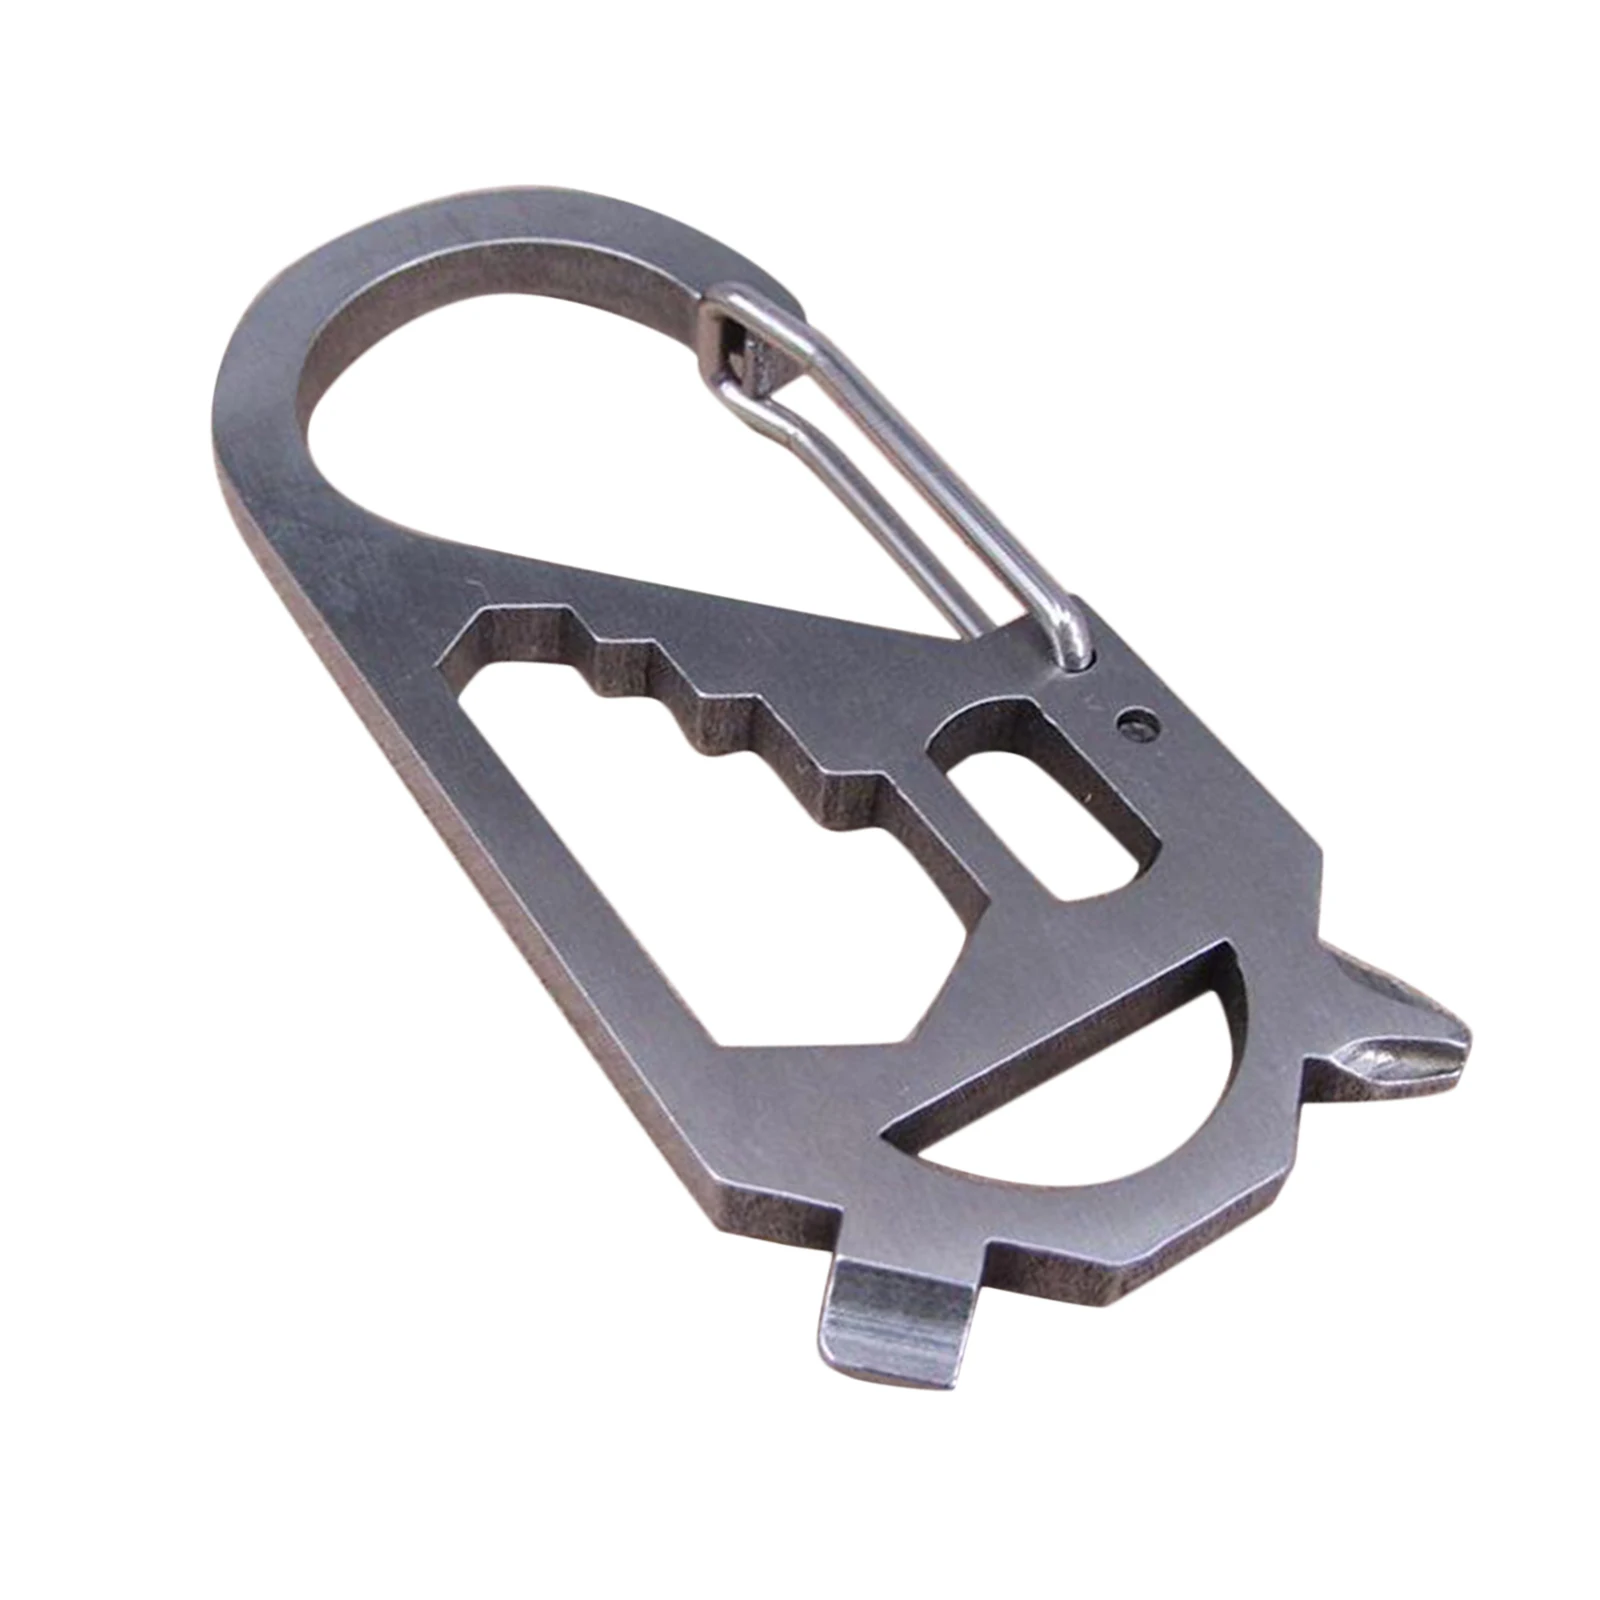 7 IN 1 Stainless Steel Pocket Carabiner Multi Tool Hunting Tactical Outdoor